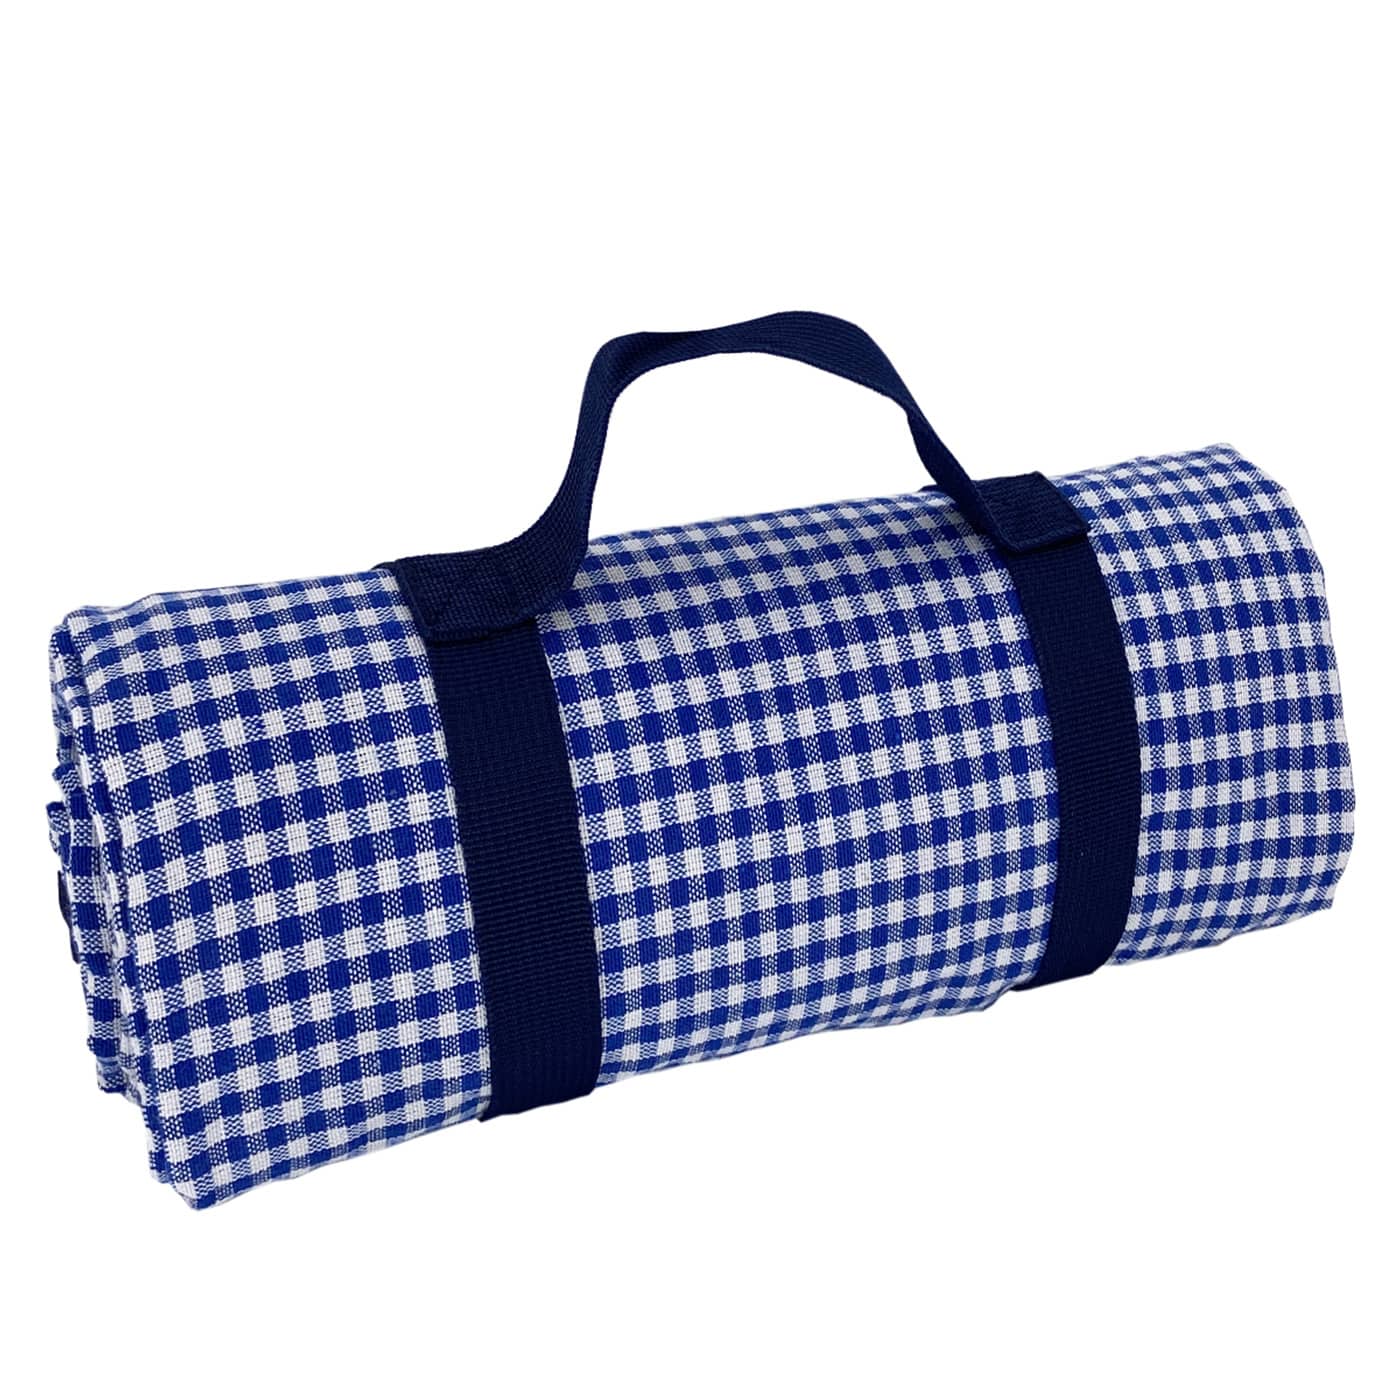 Waterproof picnic blanket blue and white gingham XL